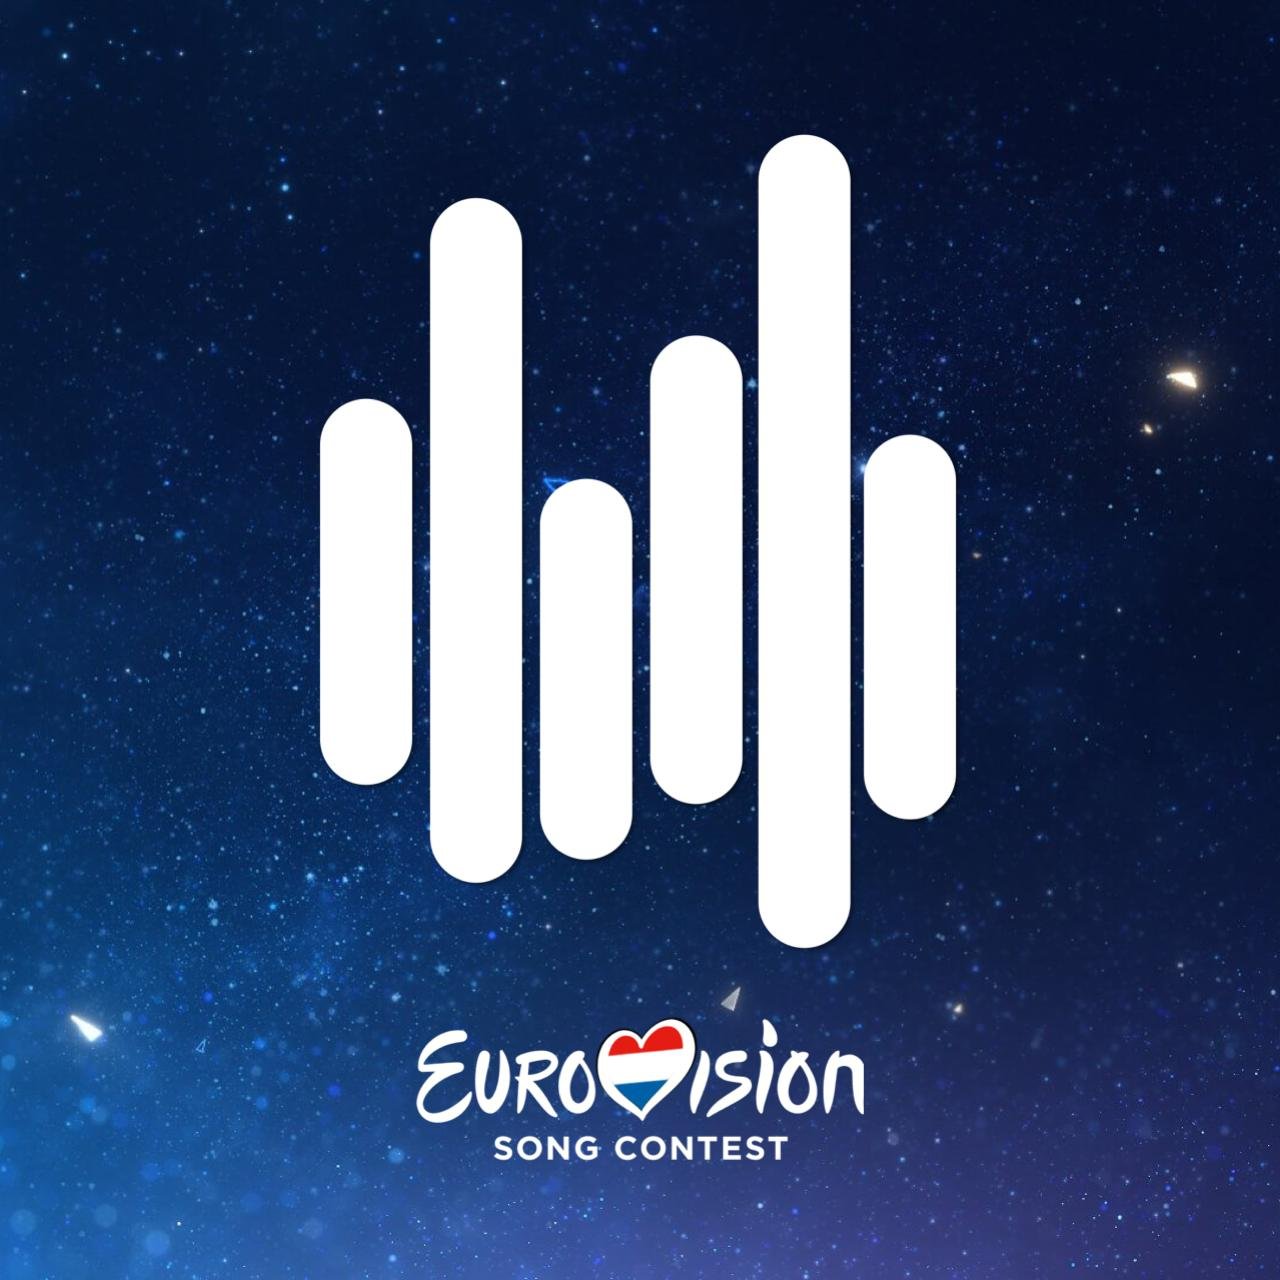 Eurovision Song Contest | Netherlands 2021 🇳🇱